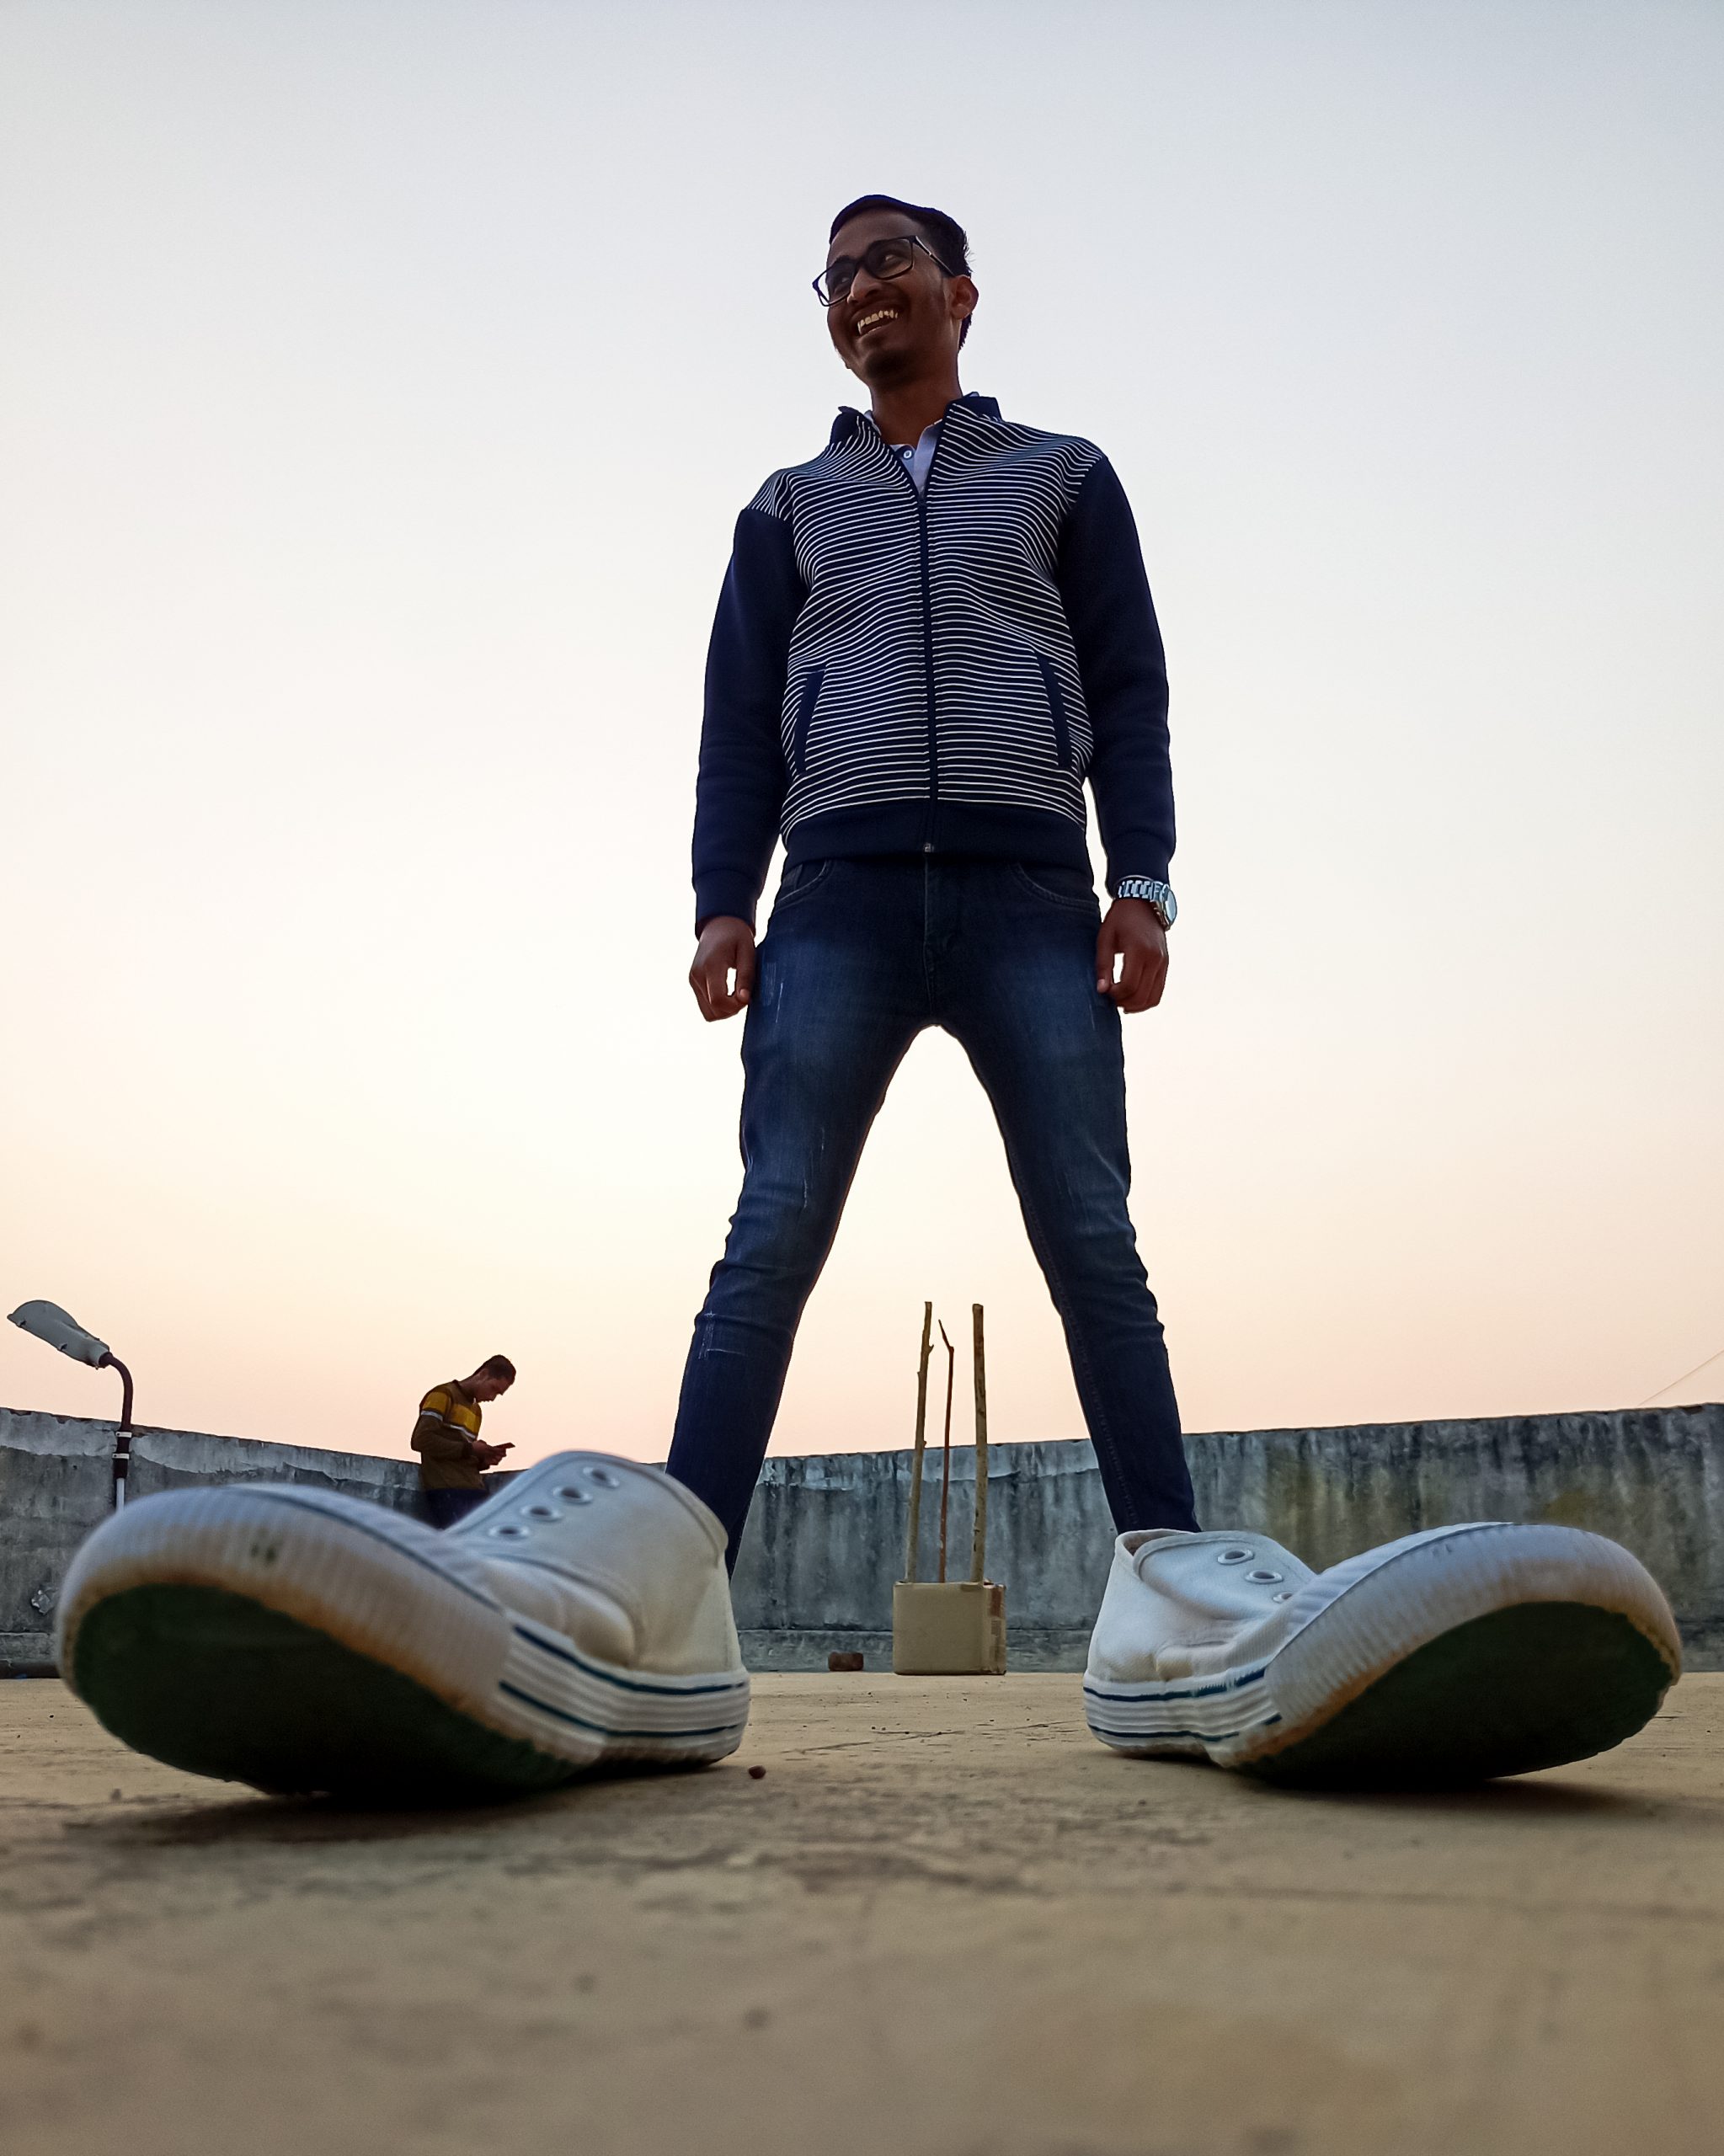 Boy posing with shoes on roof